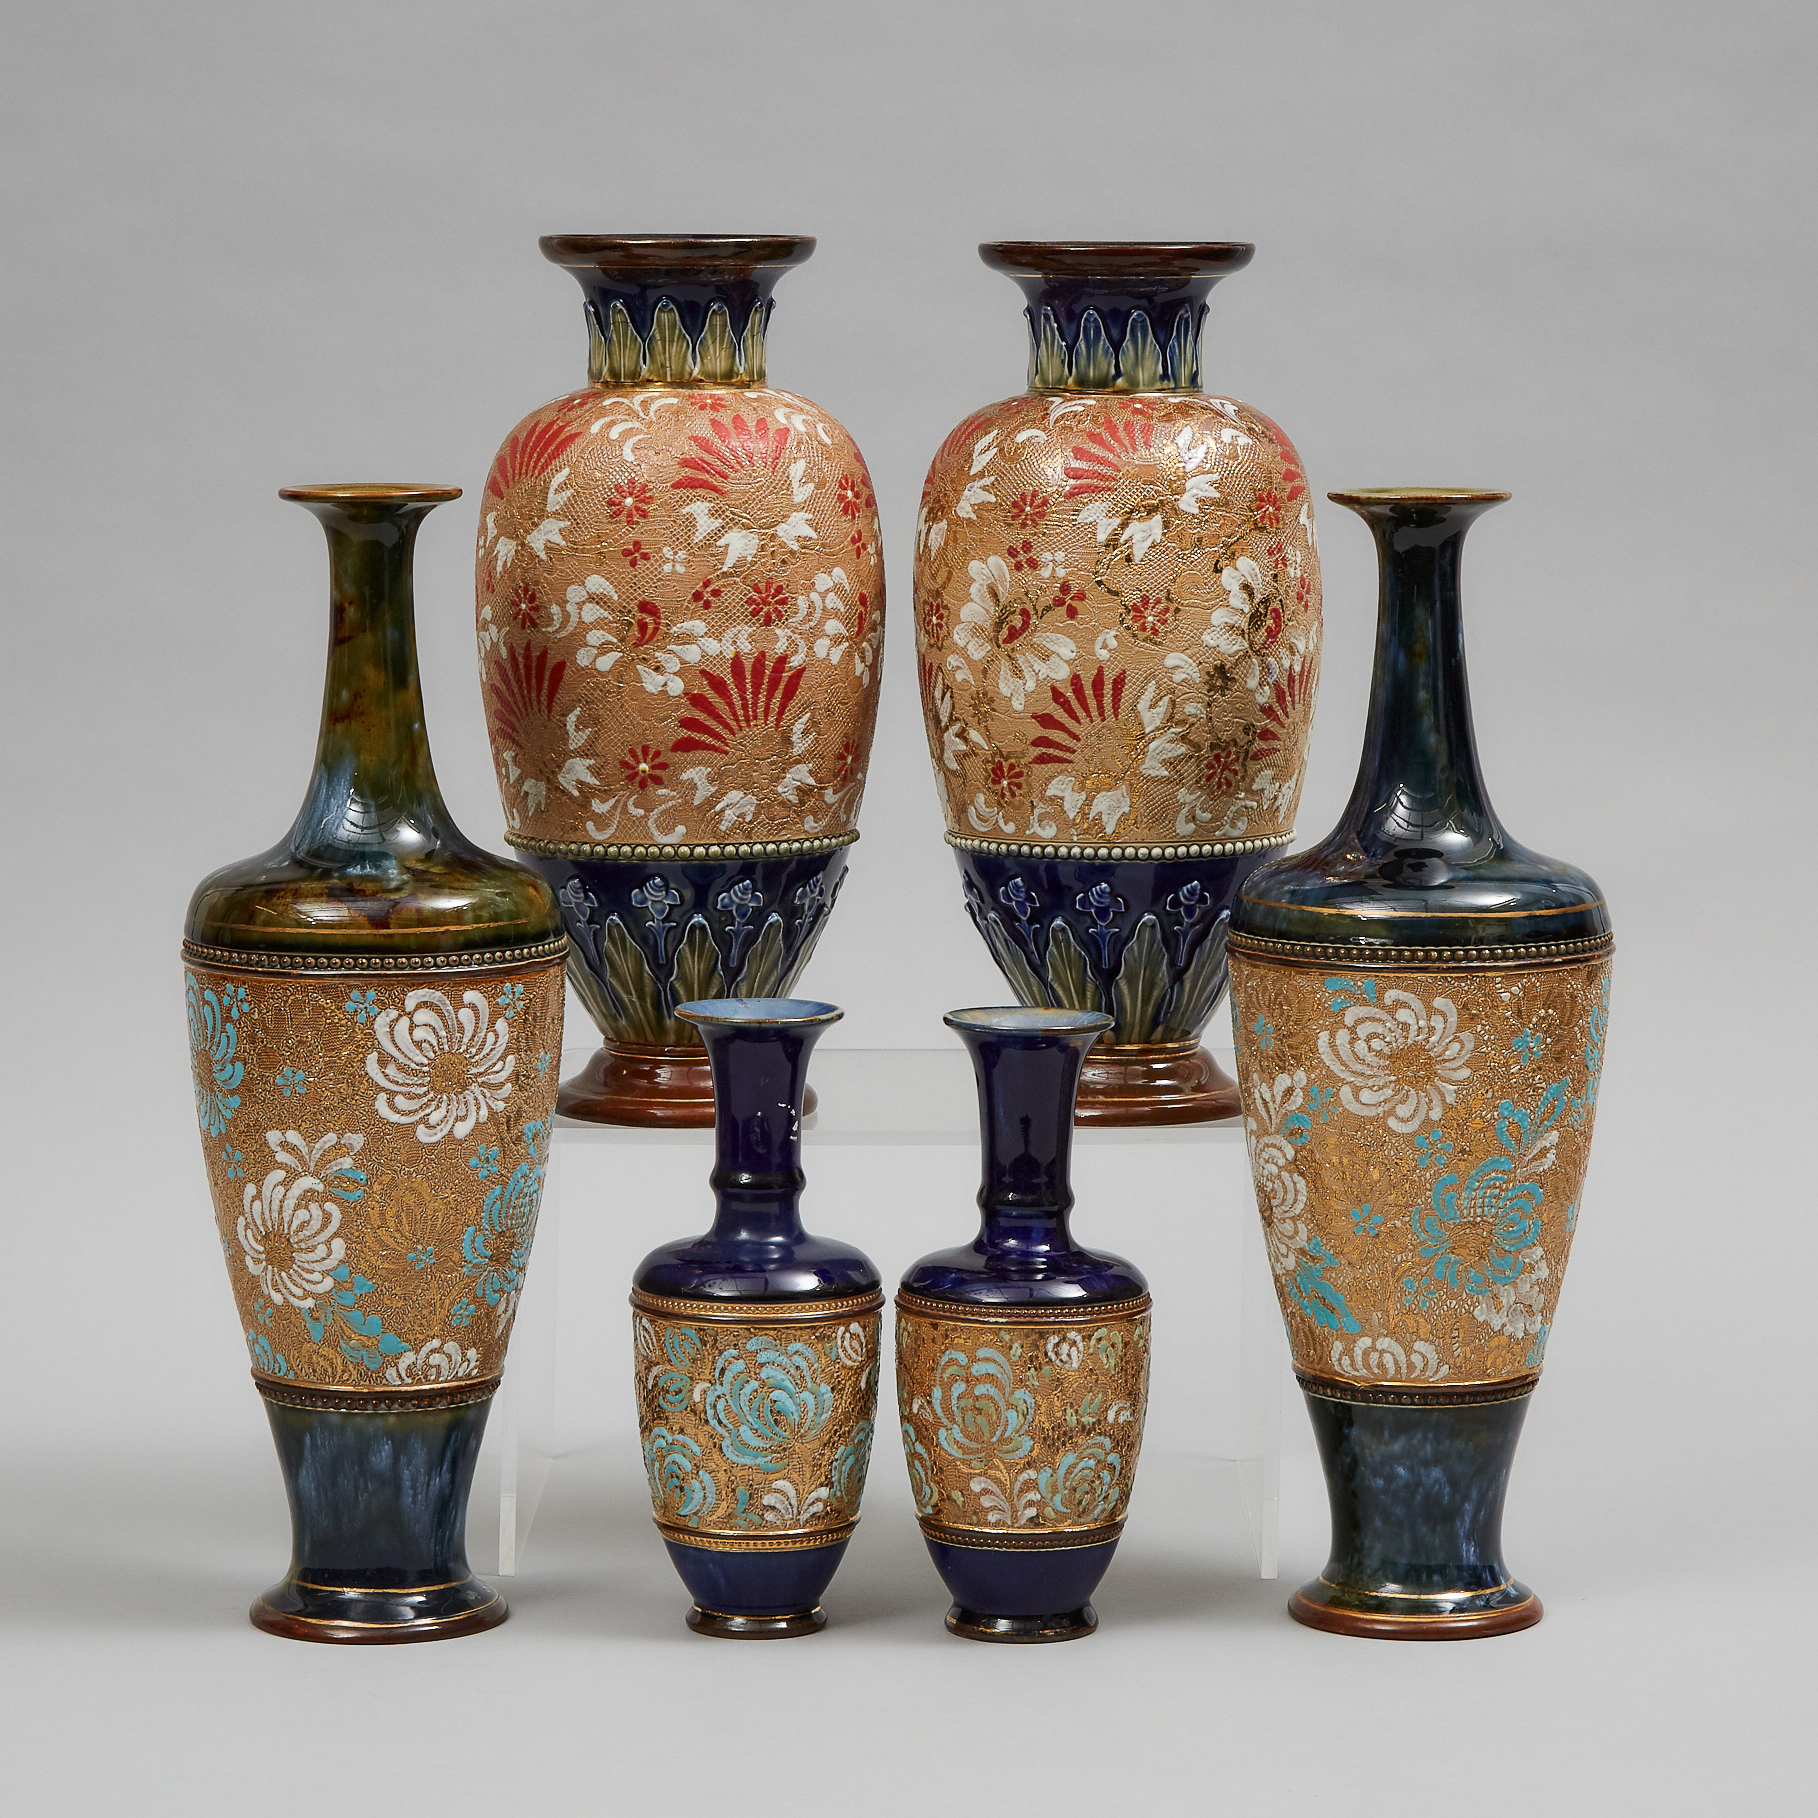 Three Pairs of Doulton & Slater's Patent Stoneware Vases, early 20th century